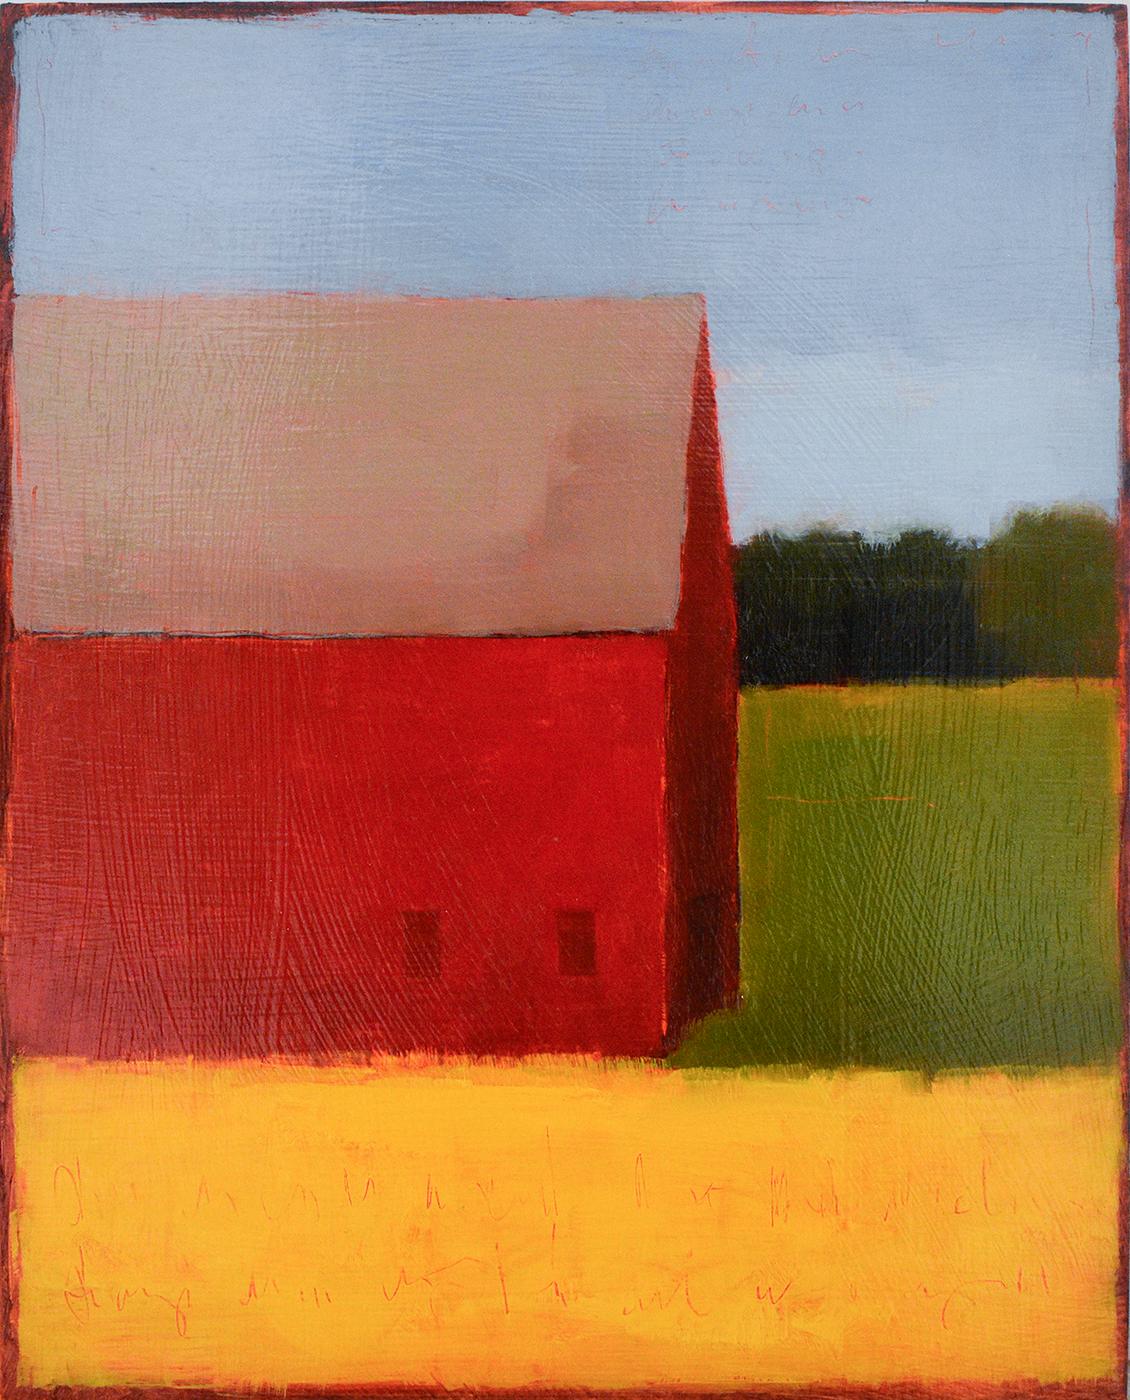 Tracy Helgeson Abstract Painting - Primarily a Barn (Minimal Abstracted Landscape Painting of a Red Barn on a Farm)